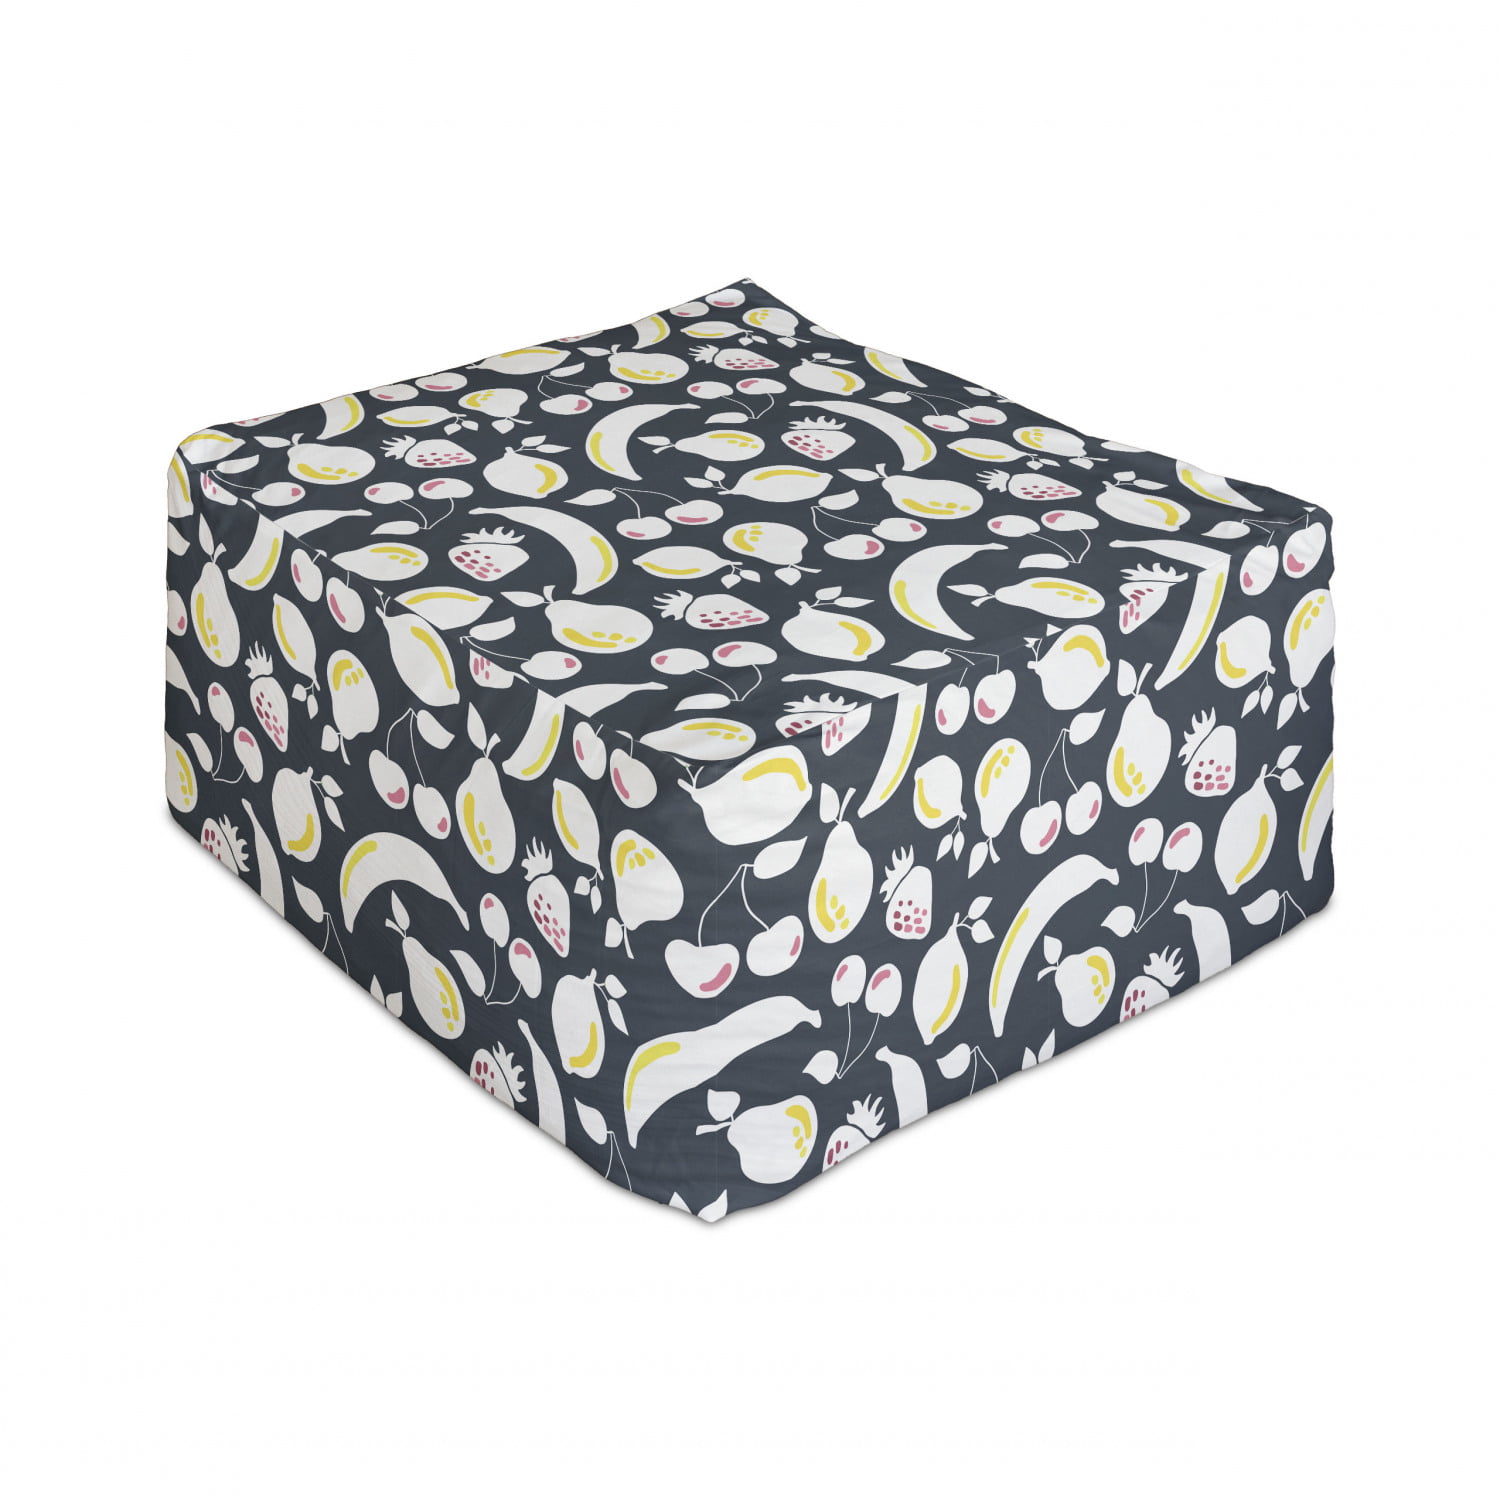 Ambesonne Colorful Rectangle Pouf Under Desk Foot Stool for Living Room Office Ottoman with Cover 25 Multicolor Beetles Inside Square Boxes of Polka Dots Stripes Funky Insects Design Print